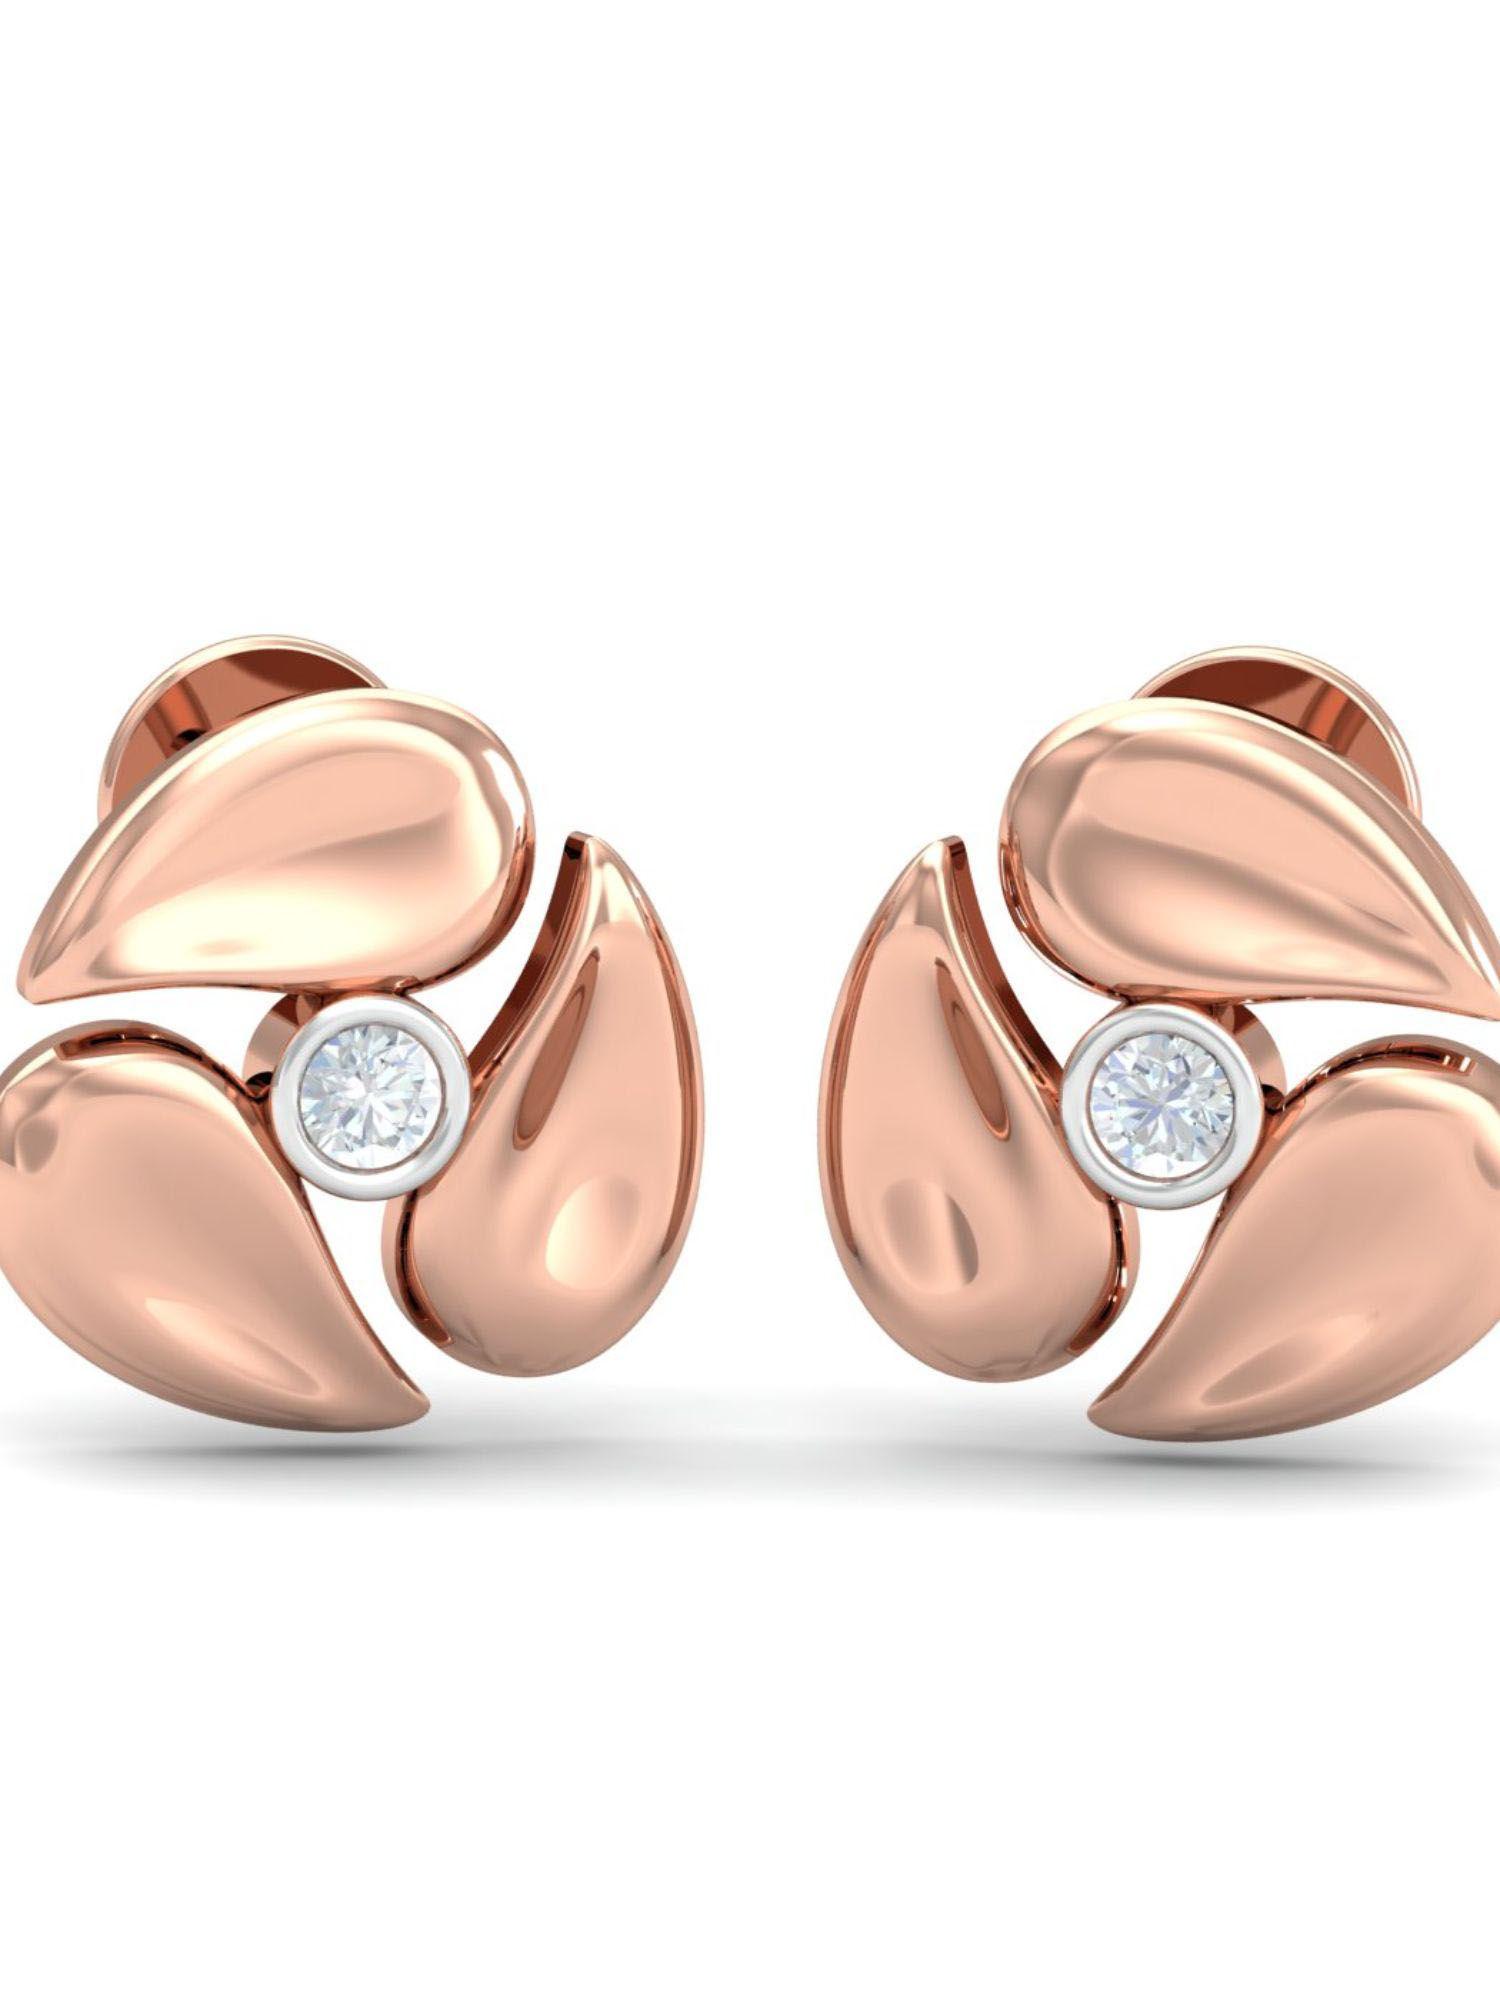 14k three petals rose-gold earrings for women and girls